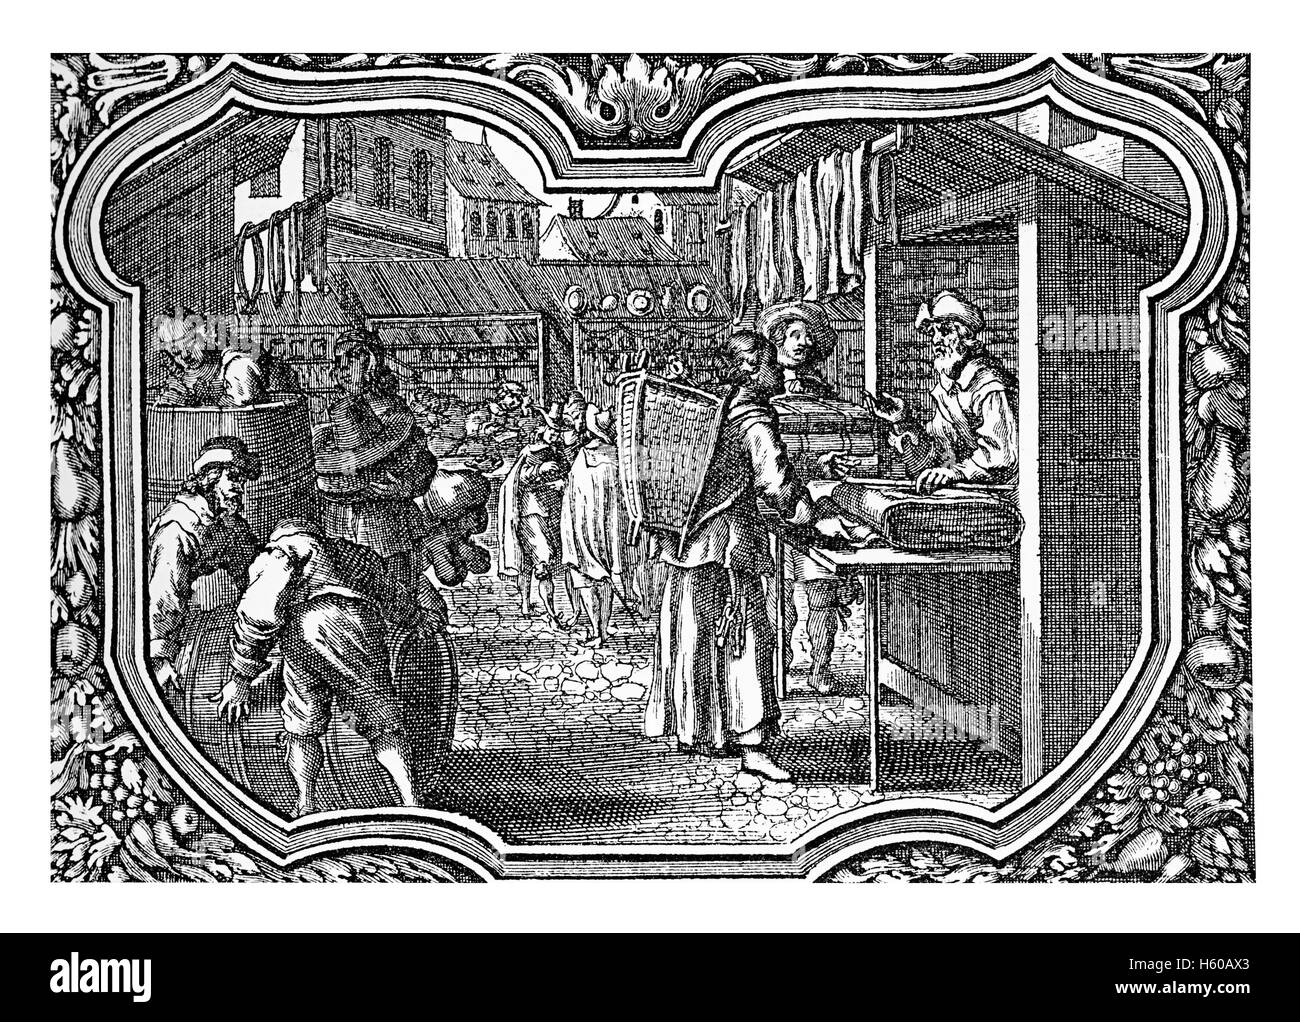 Germany, XVII century city view with festive market, people buying food, drinks and cloths, engraving within decorated frame Stock Photo